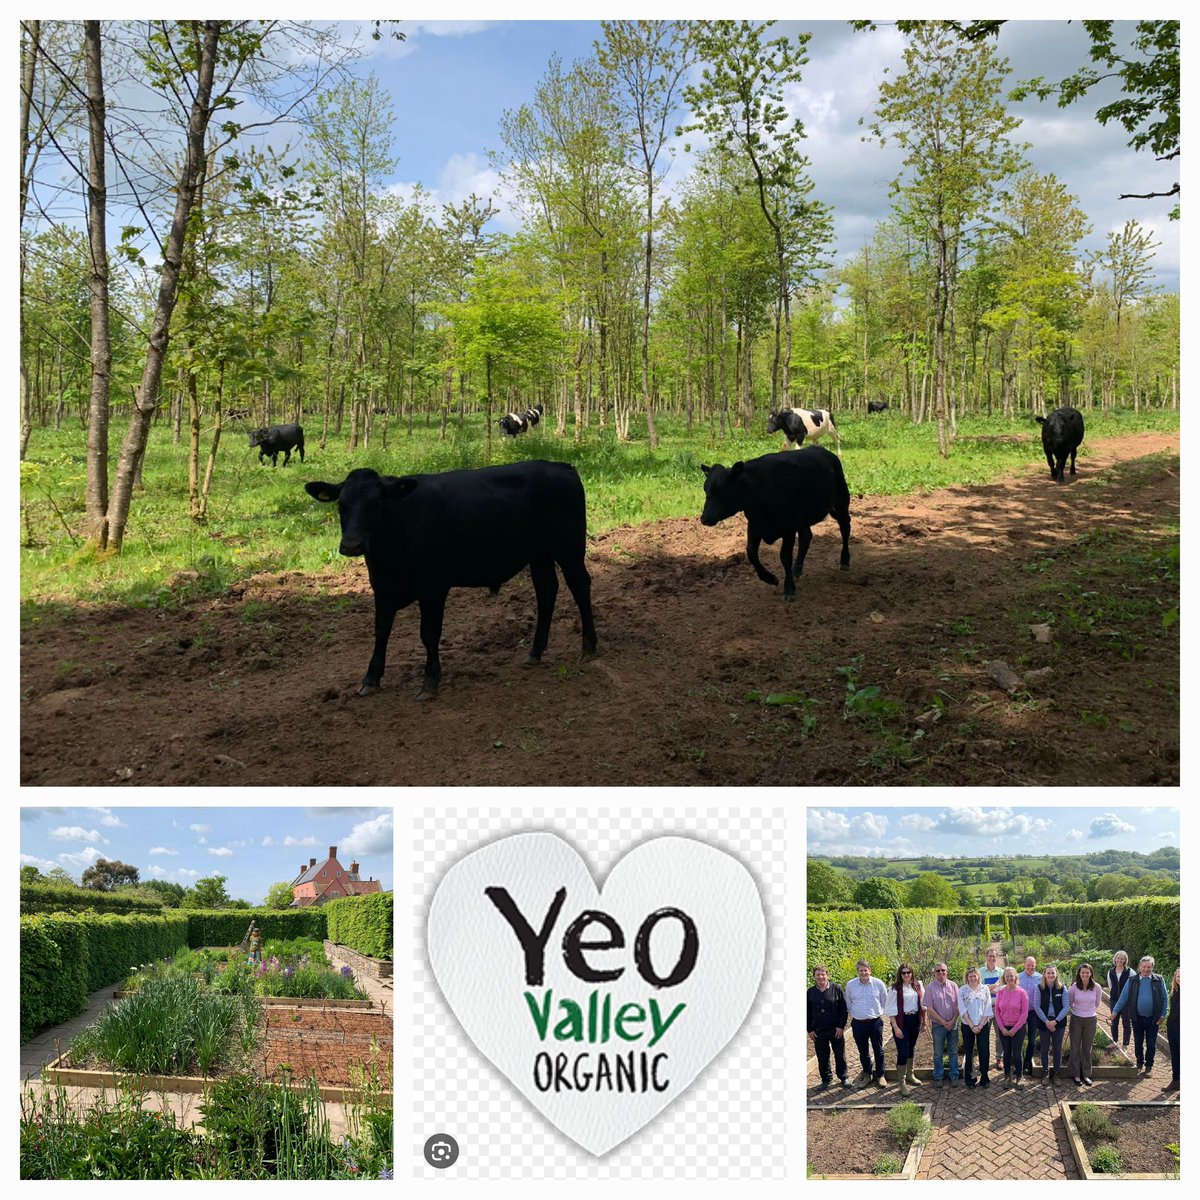 Glorious day @yeovalley as the @NFUsouthwest #organic forum rep. Learning about #agroforestry #regenerativedairy @NFUtweets